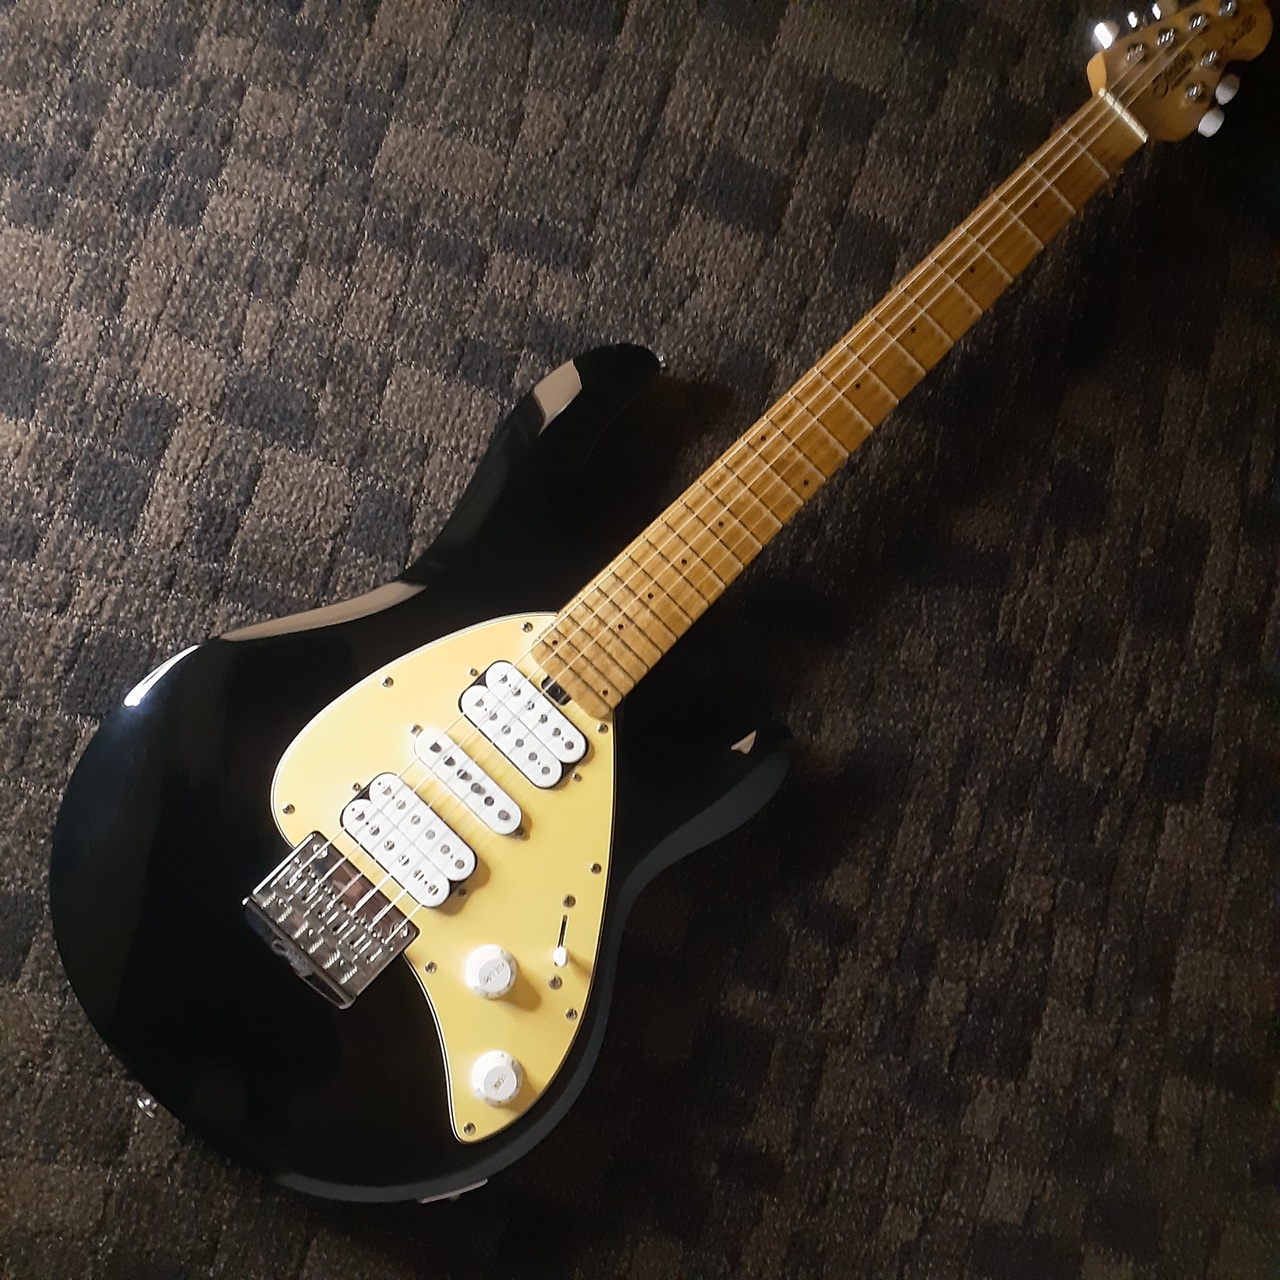 sterling by musicman Silo20 - ギター